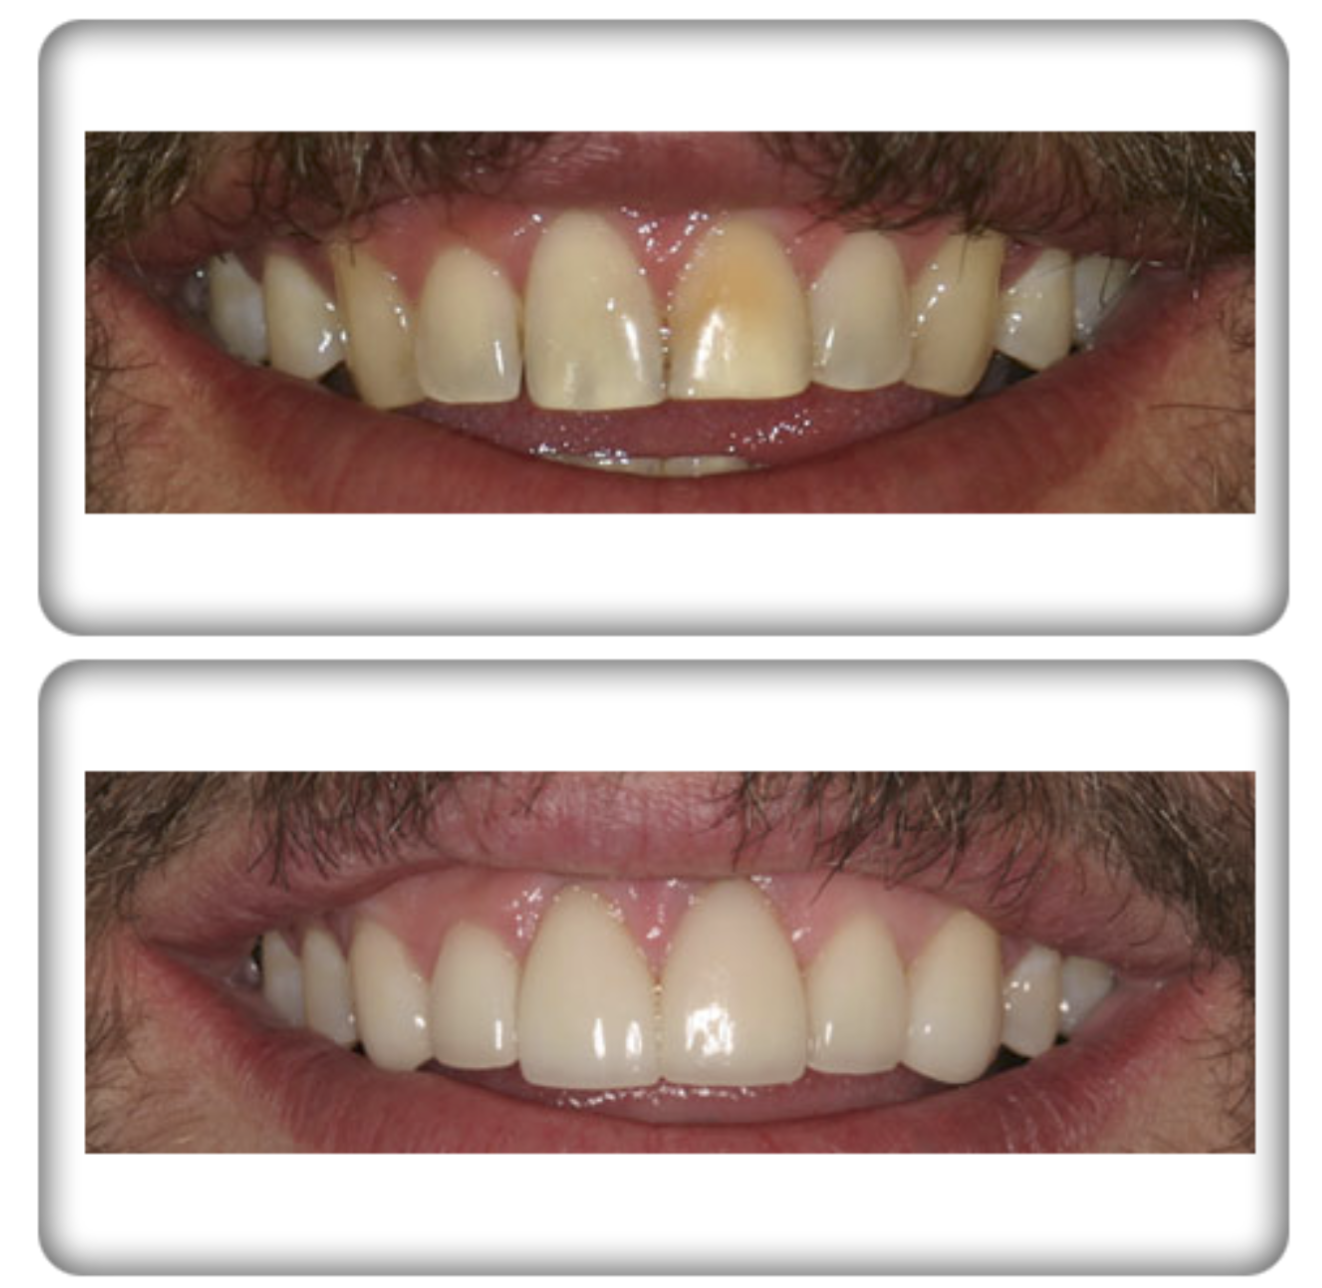 image showing before and after difference from cosmetic dentistry services